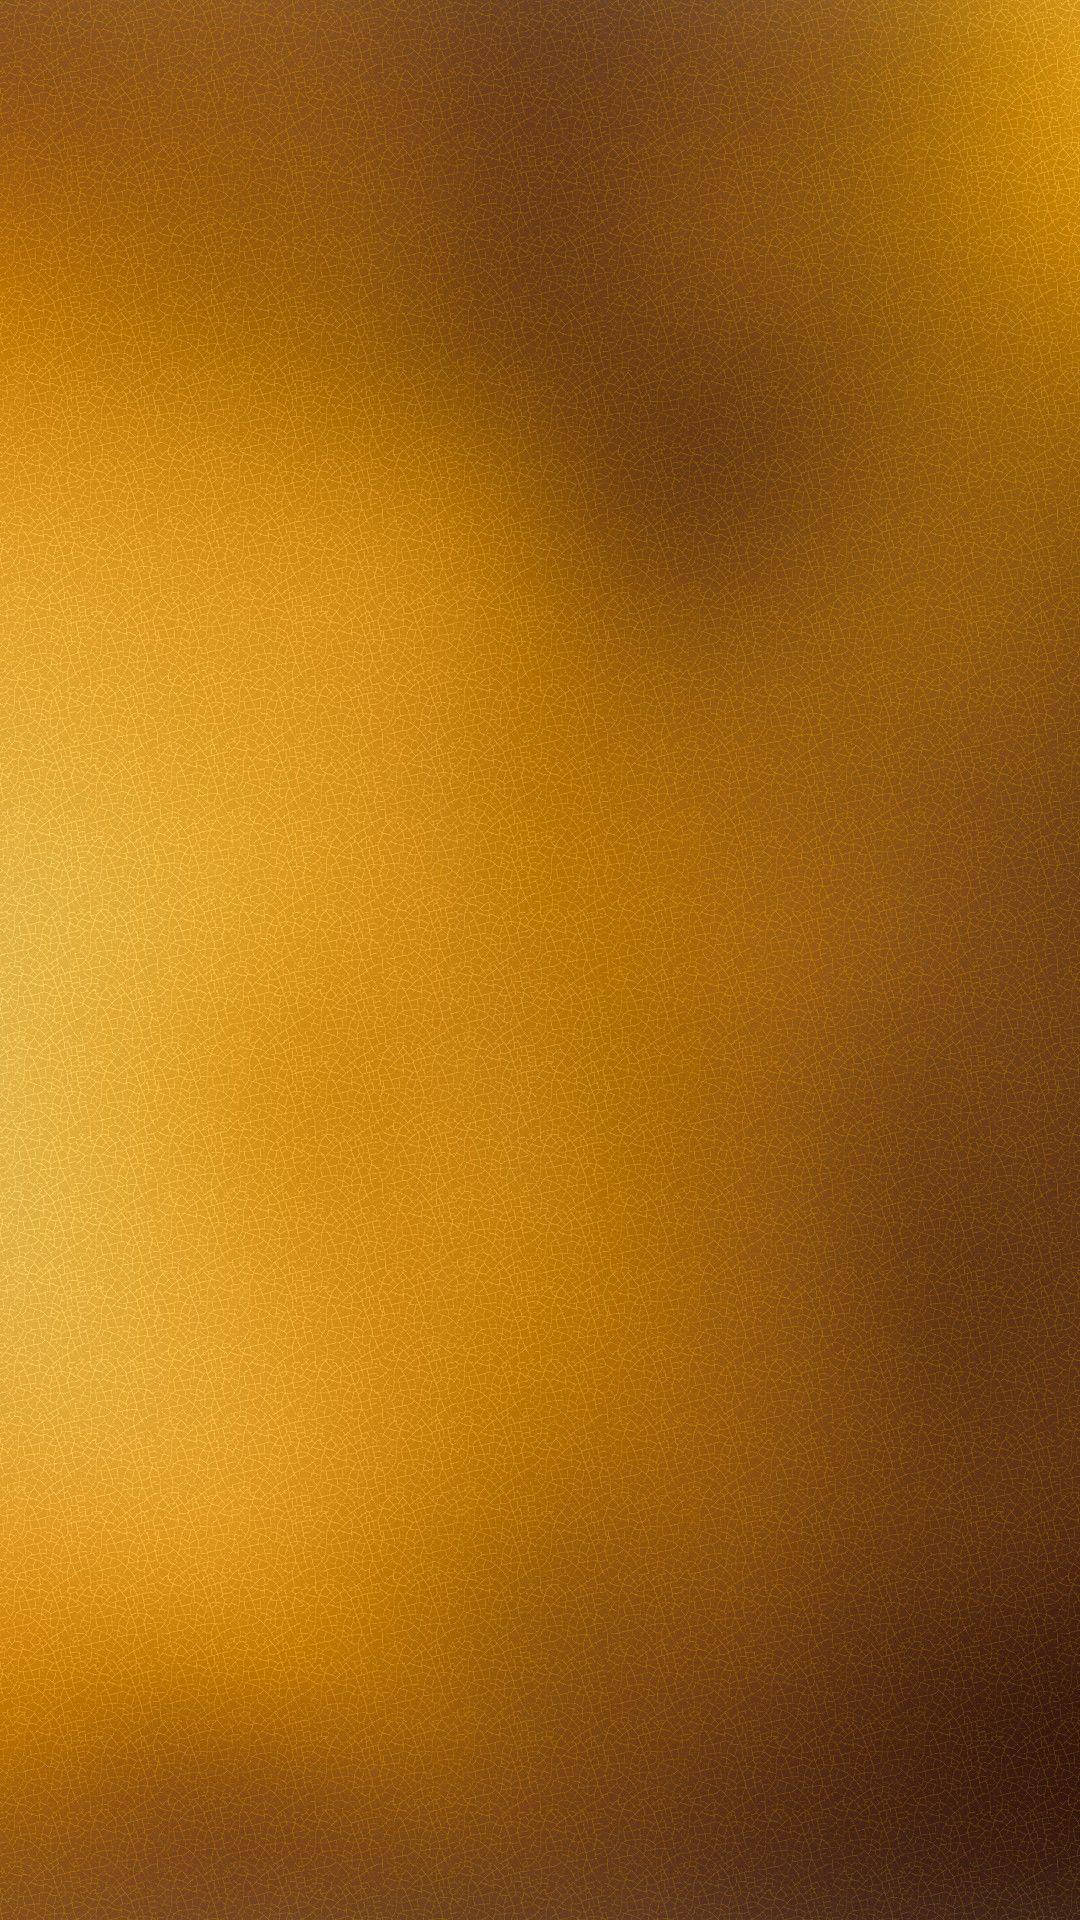 Classic Golden Design On Iphone Background